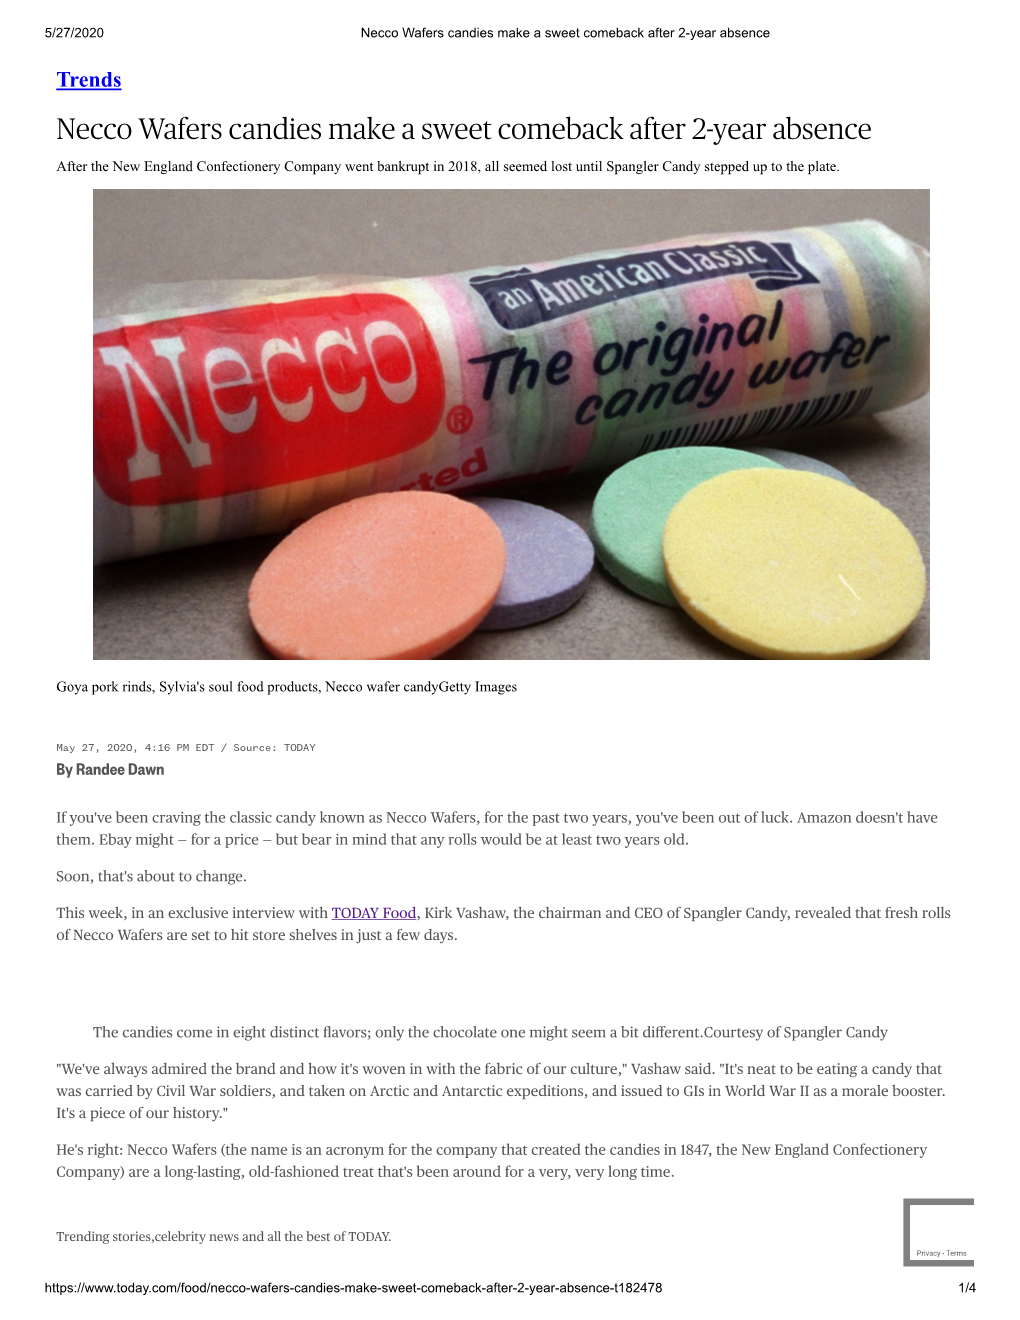 Necco Wafers Candies Make a Sweet Comeback After 2-Year Absence